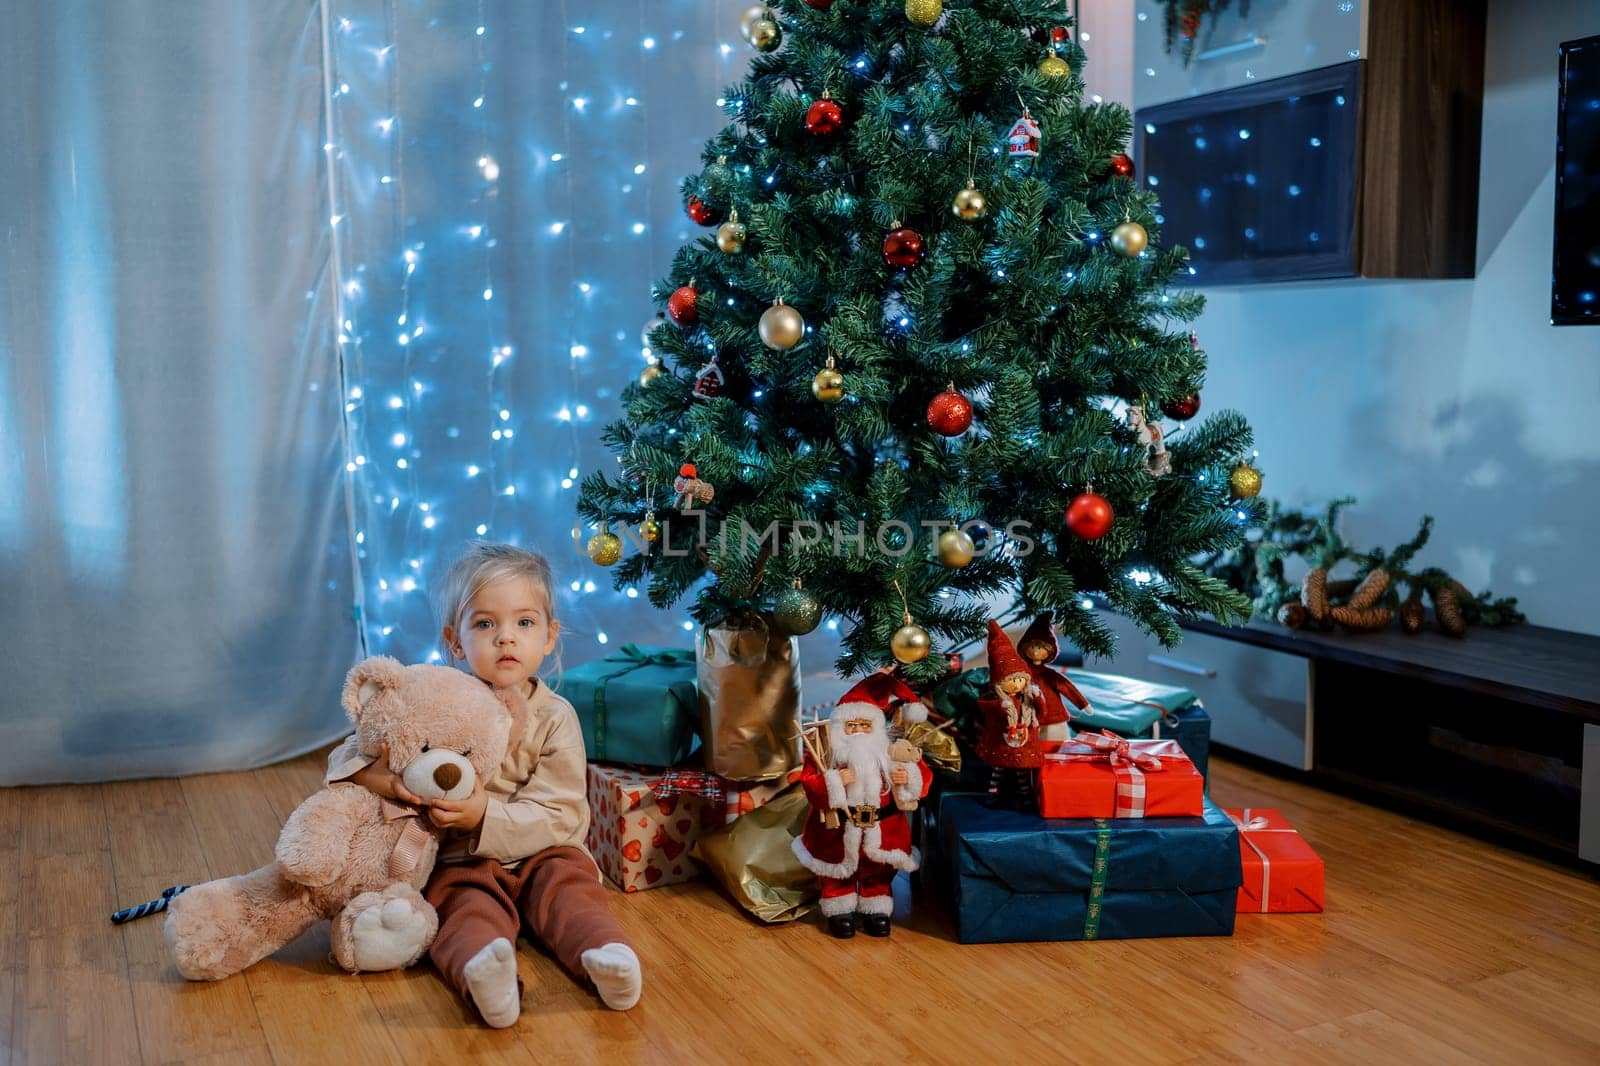 Little girl sits hugging a teddy bear on the floor next to gifts under the Christmas tree by Nadtochiy